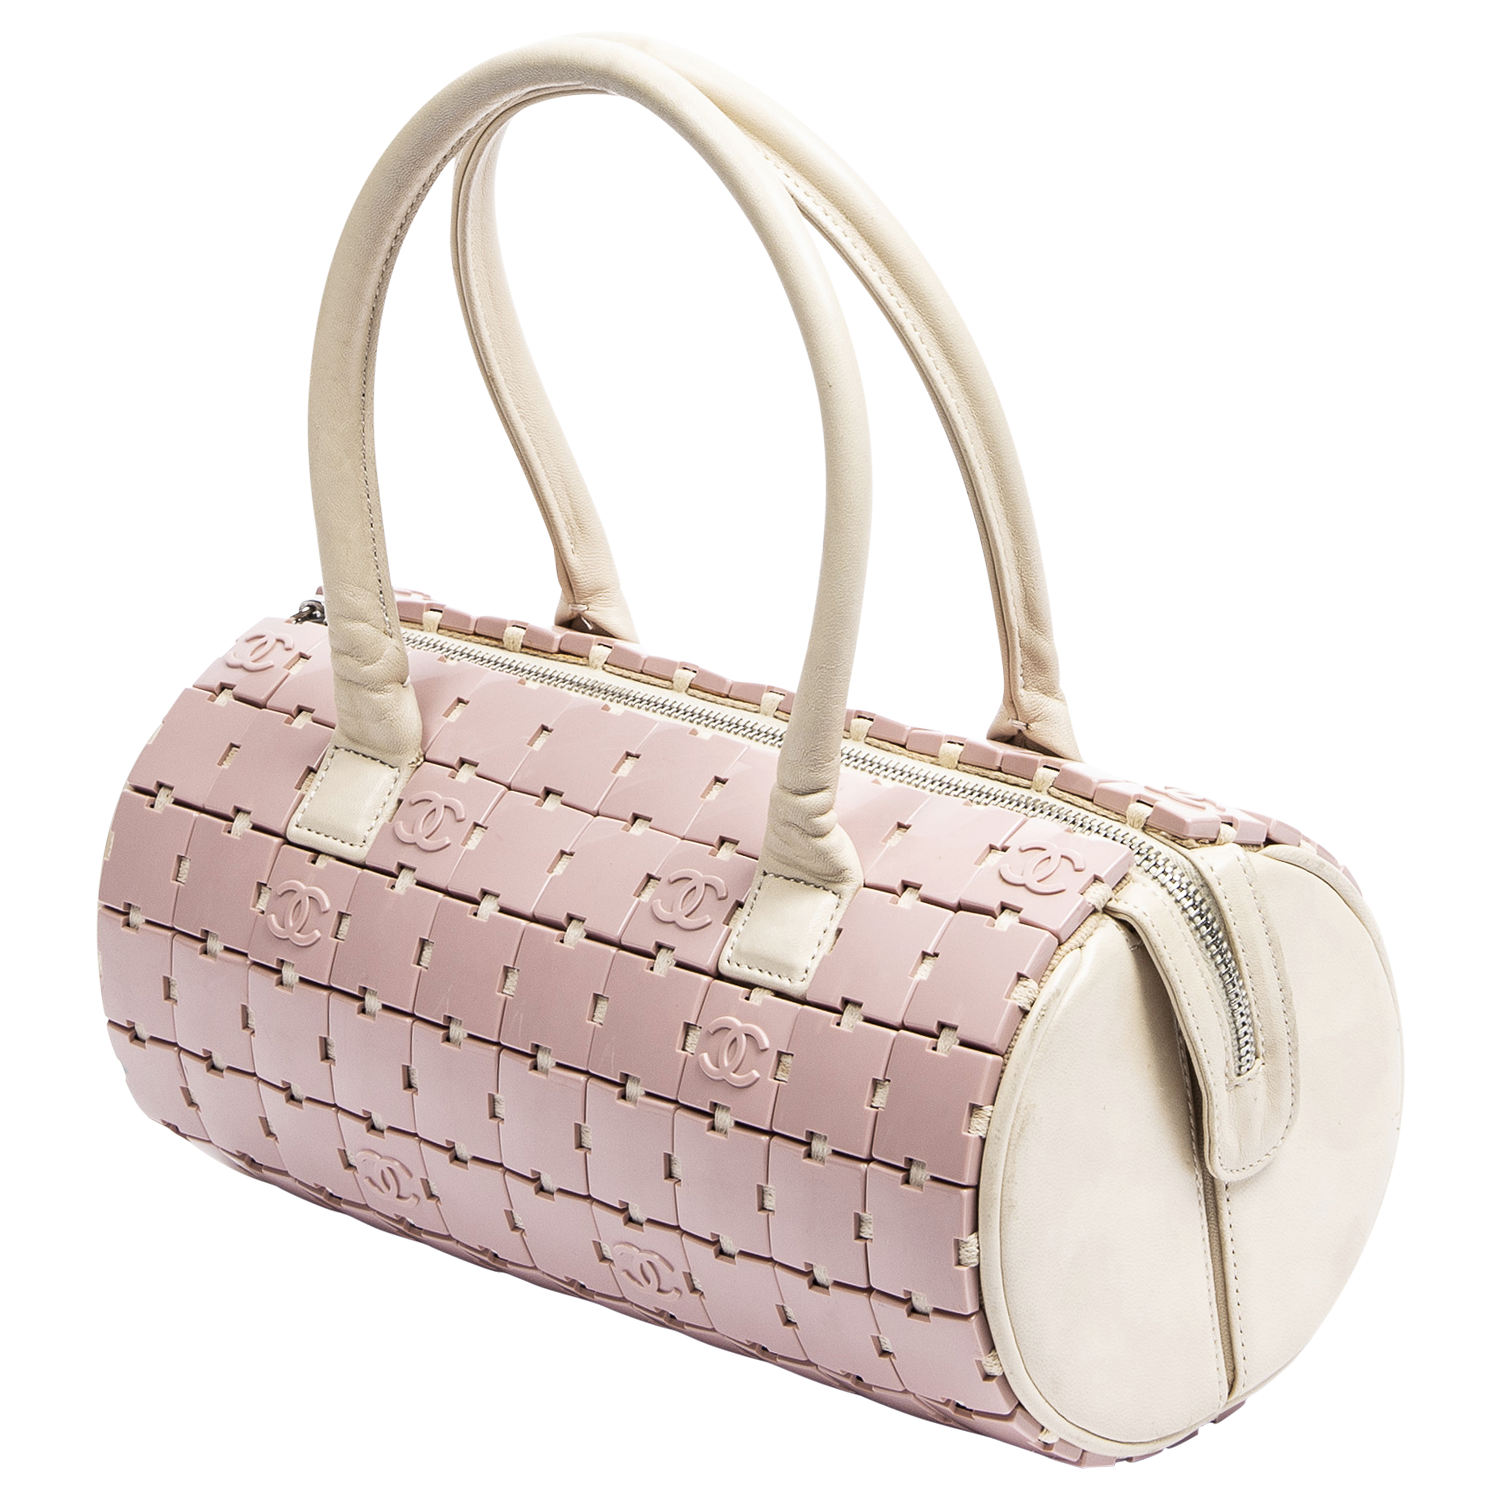 Chanel 2000s Limited Edition Pink Puzzle Top Handle Bag